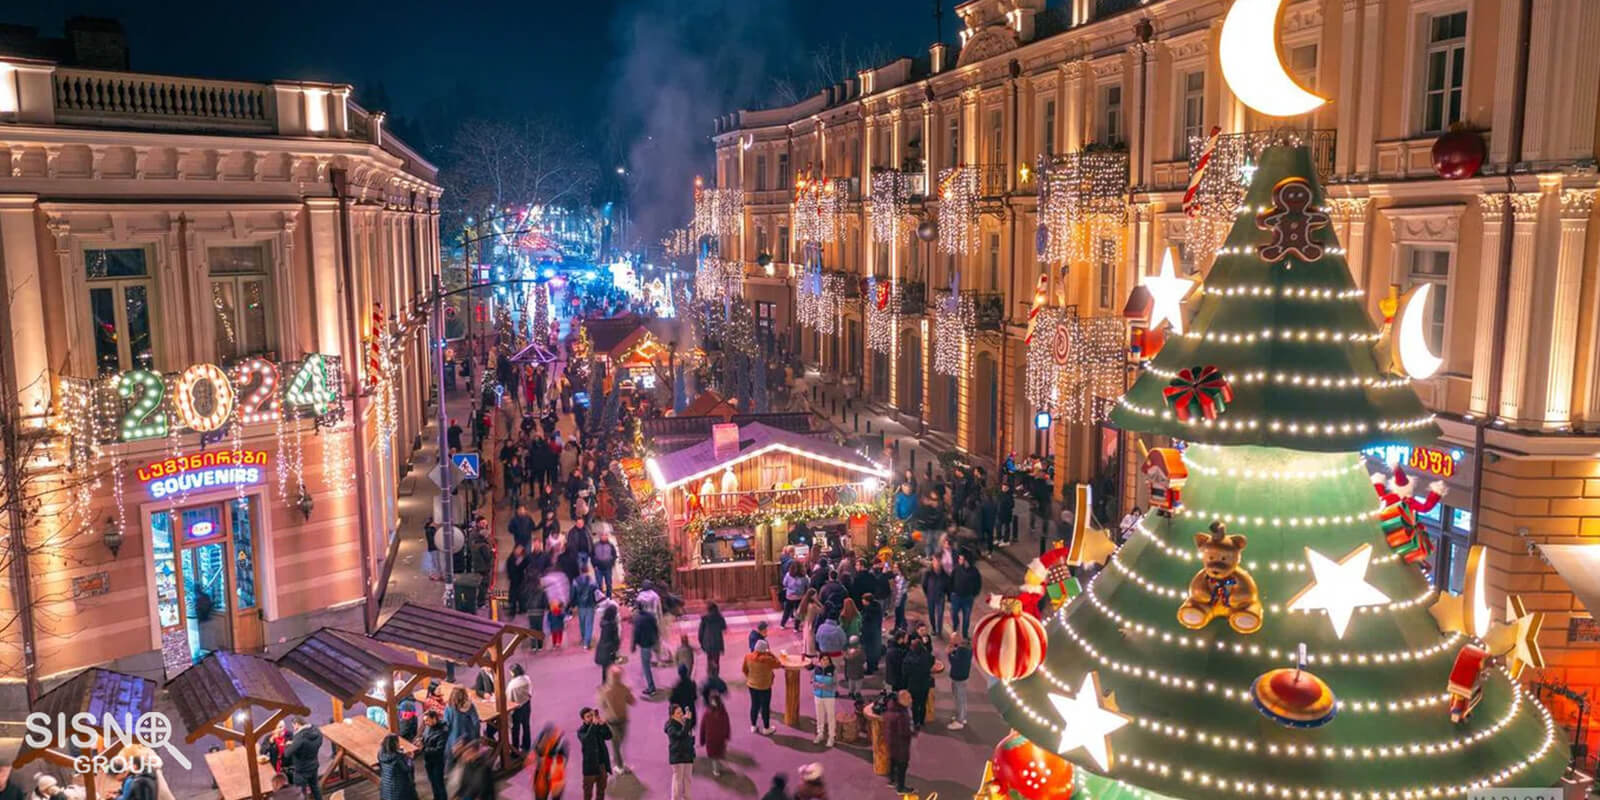 Christmas Village in Tbilisi